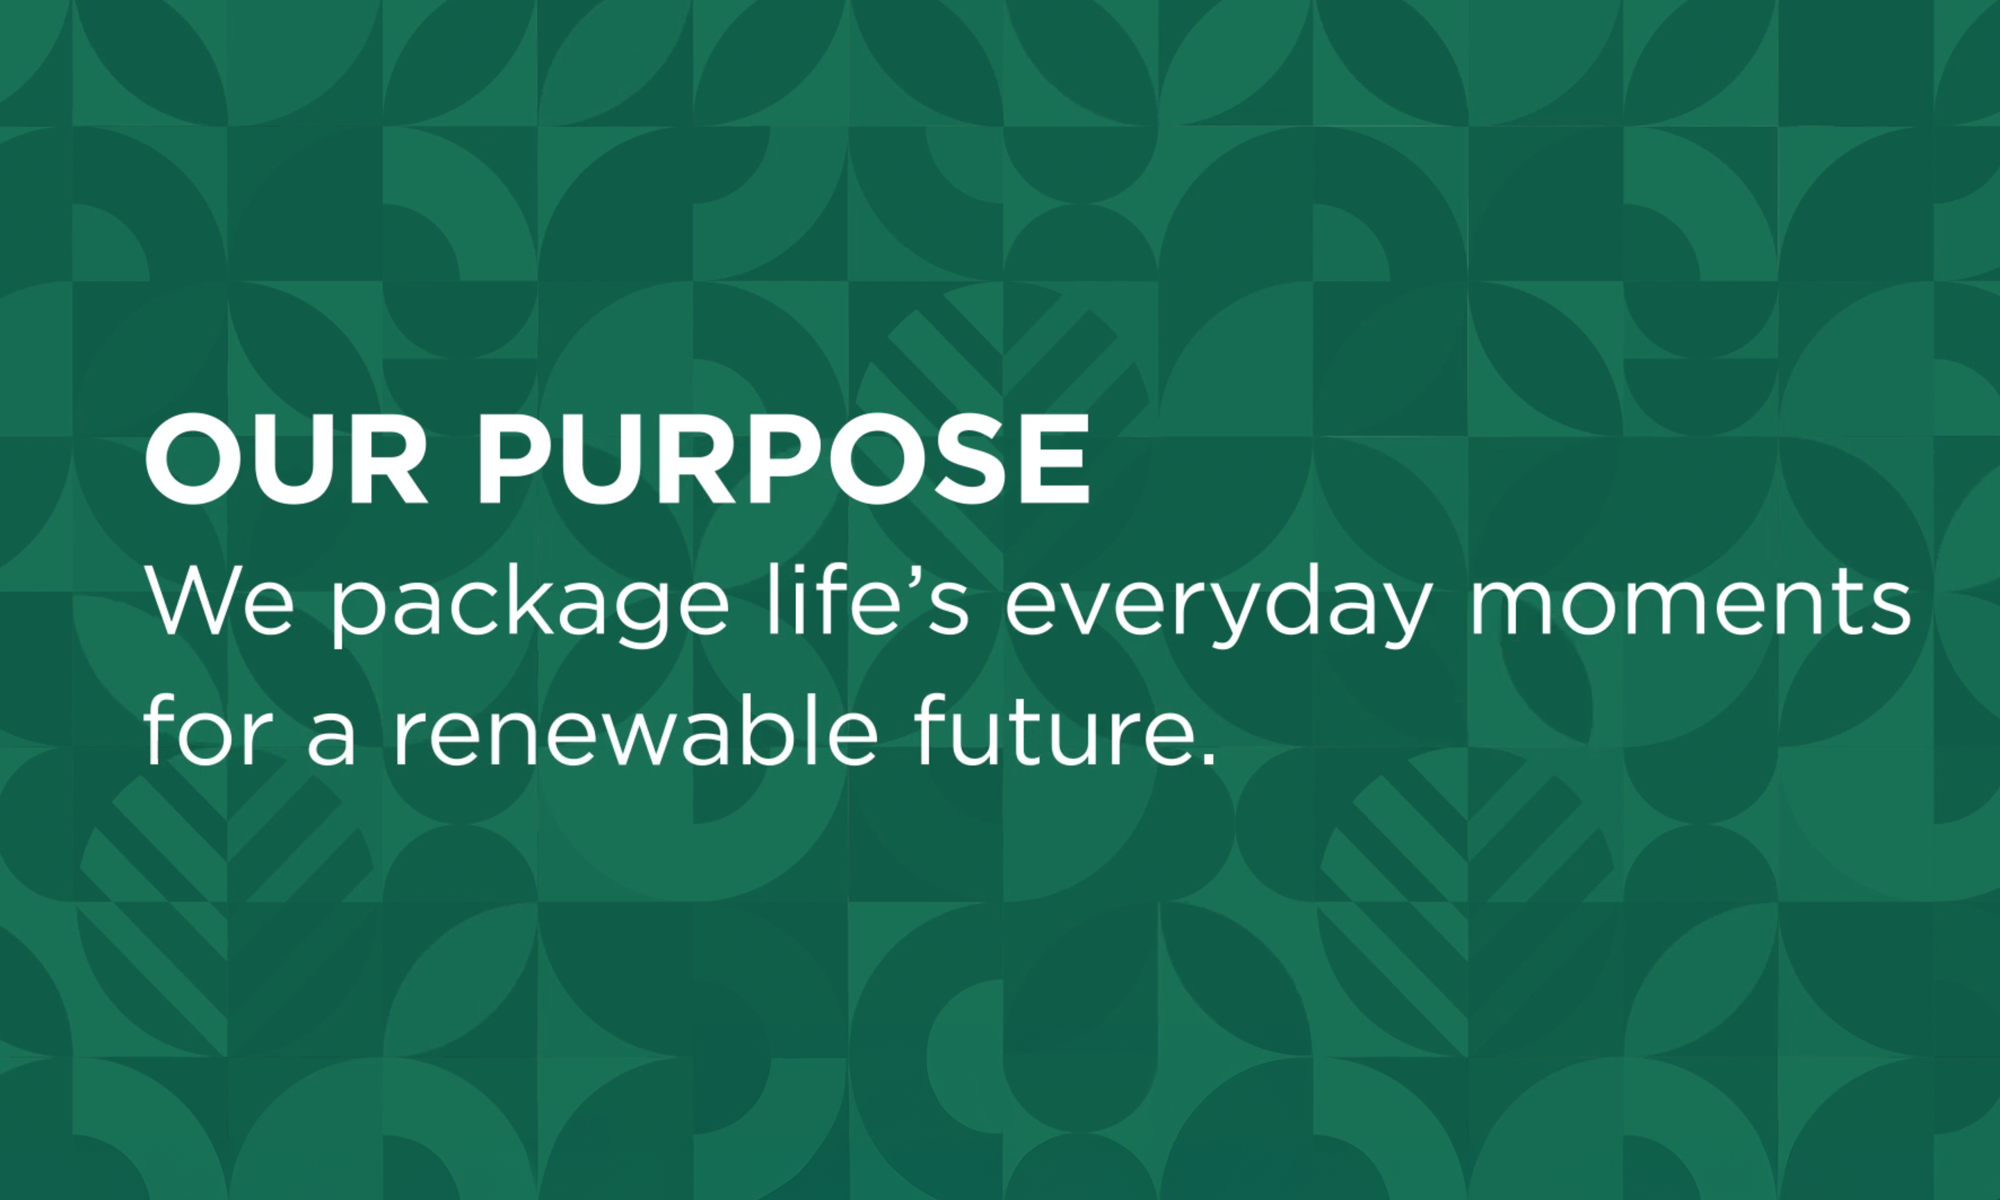 Our shared purpose: We package life’s everyday moments for a renewable future